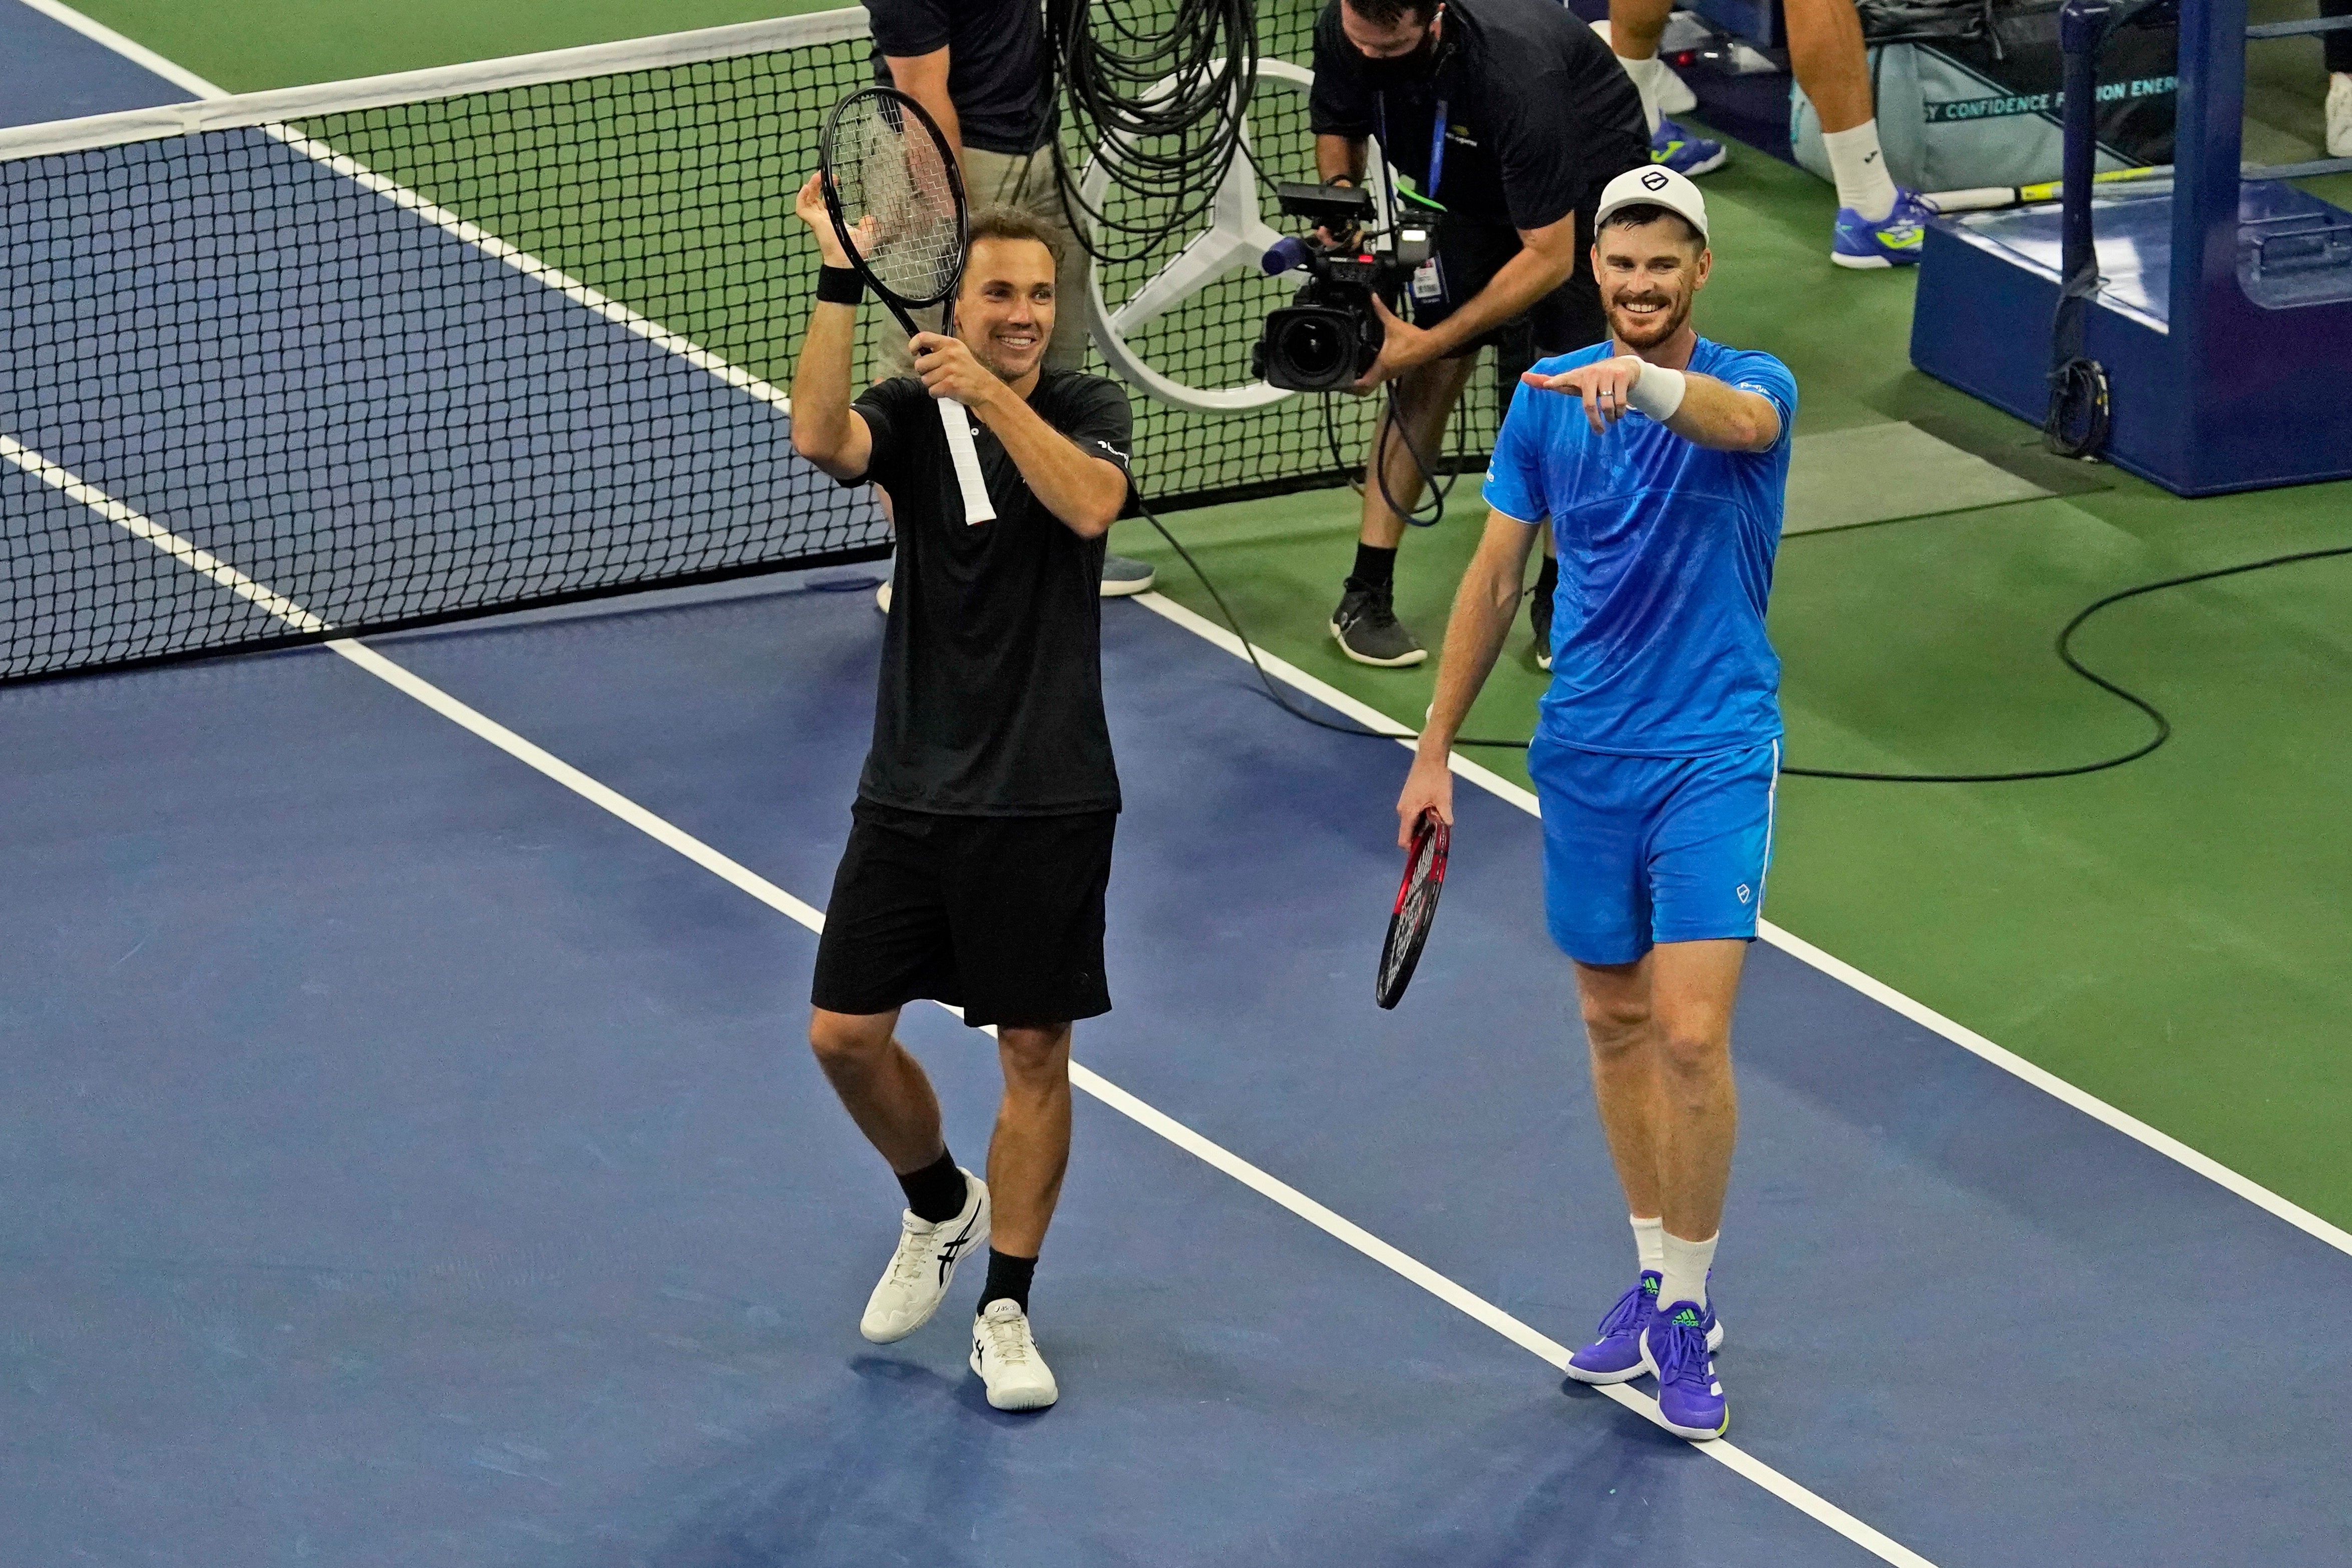 Jamie Murray and Bruno Soares are looking for US Open glory (Seth Wenig/AP)